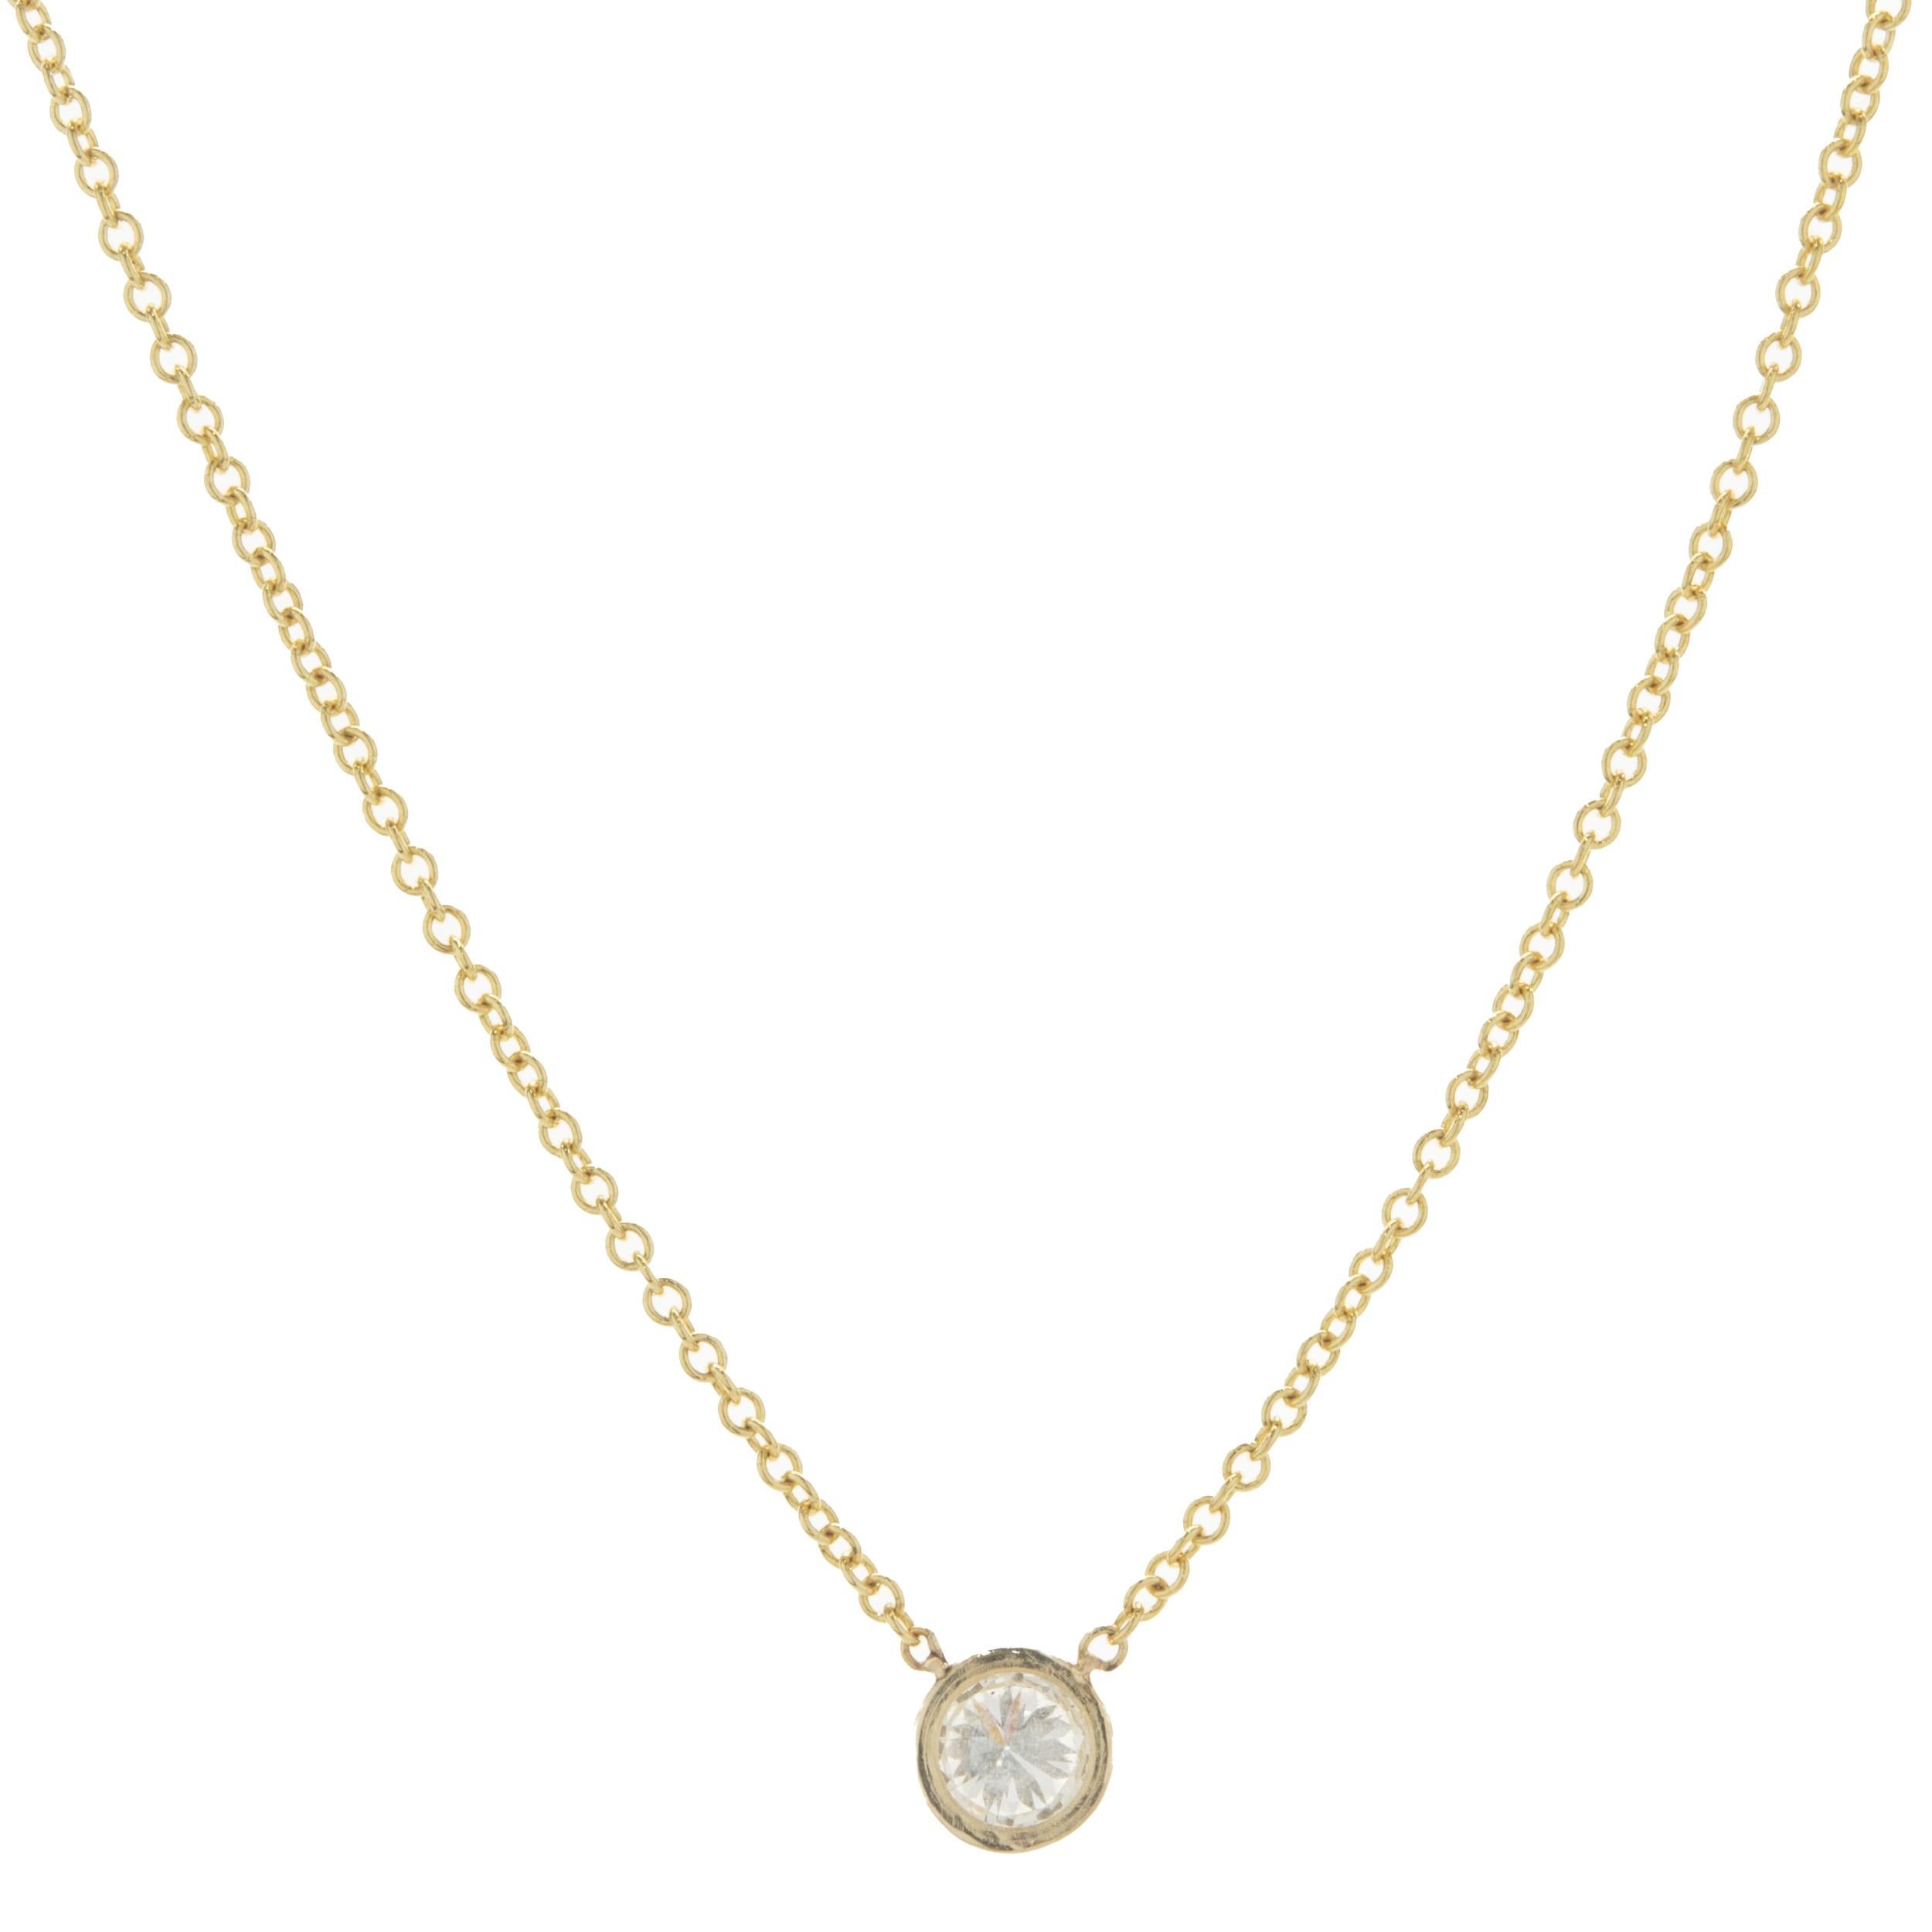 Designer: custom design
Material: 14K yellow gold
Diamond: 1 round = 0.20cttw
Color: G
Clarity: VS2
Dimensions: necklace measures 18-inches in length 
Weight: 1.31 grams